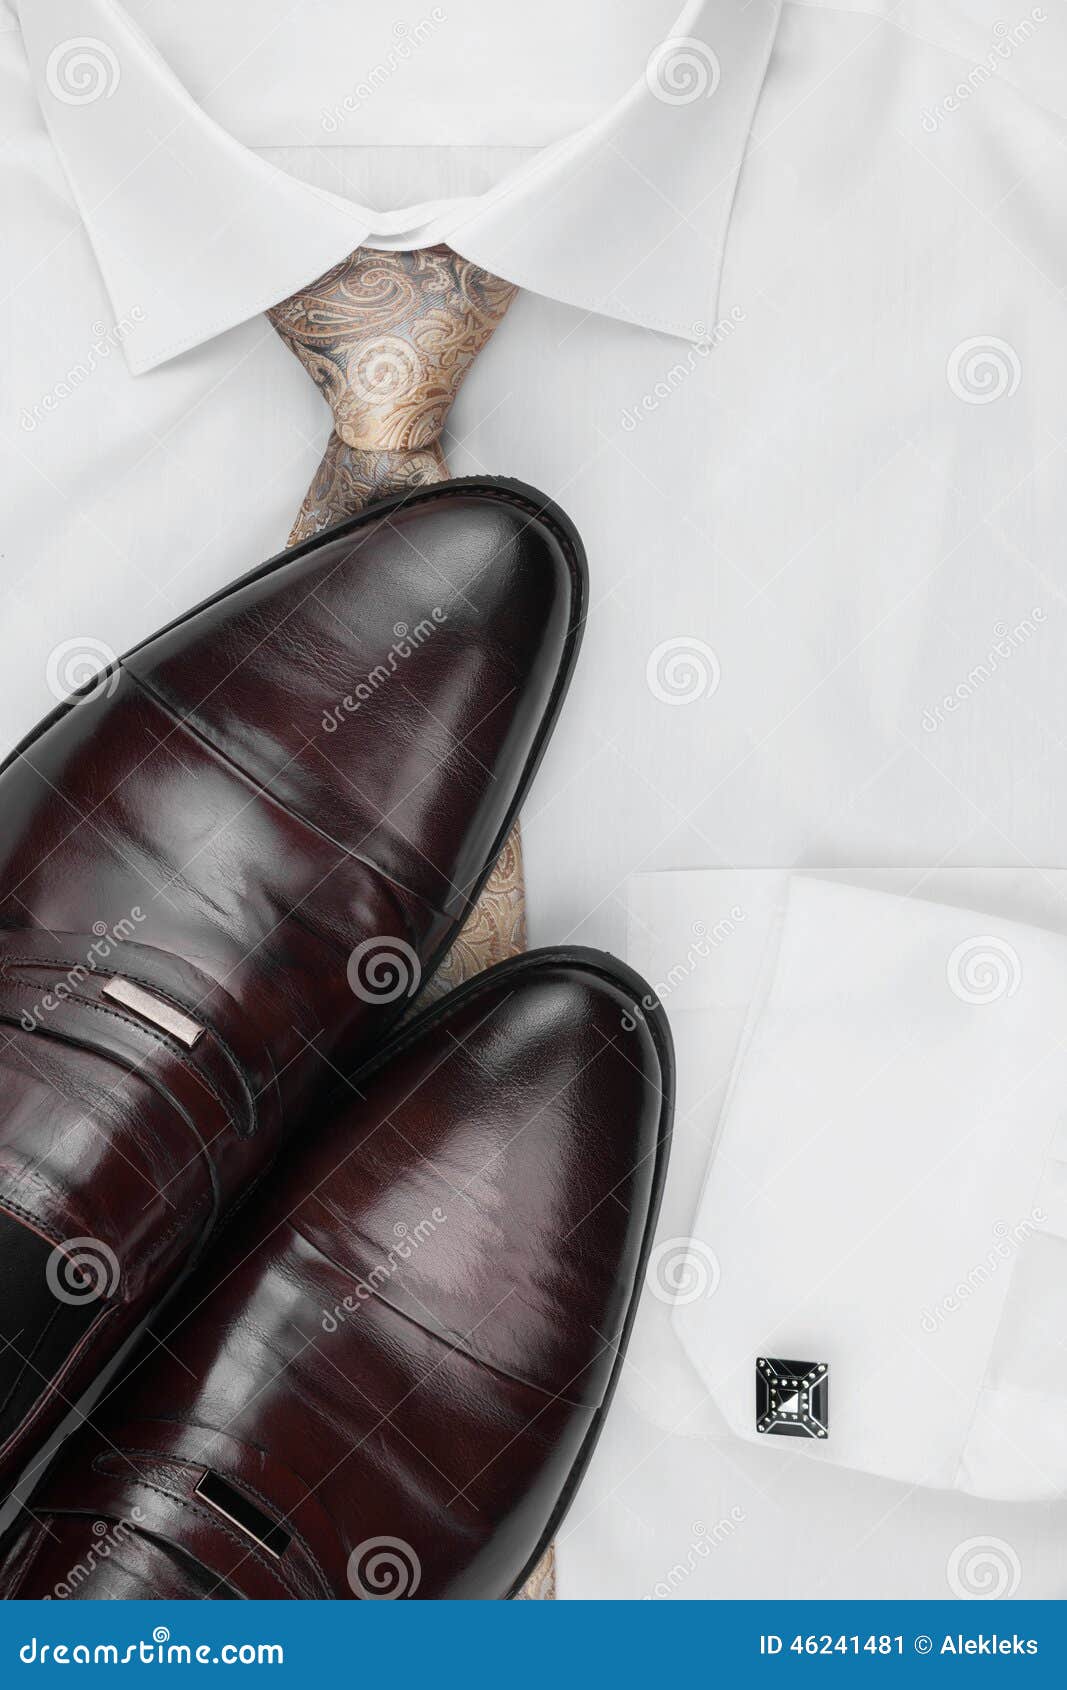 Classic Men S Shoes, Tie on a White Shirt Stock Image - Image of ...